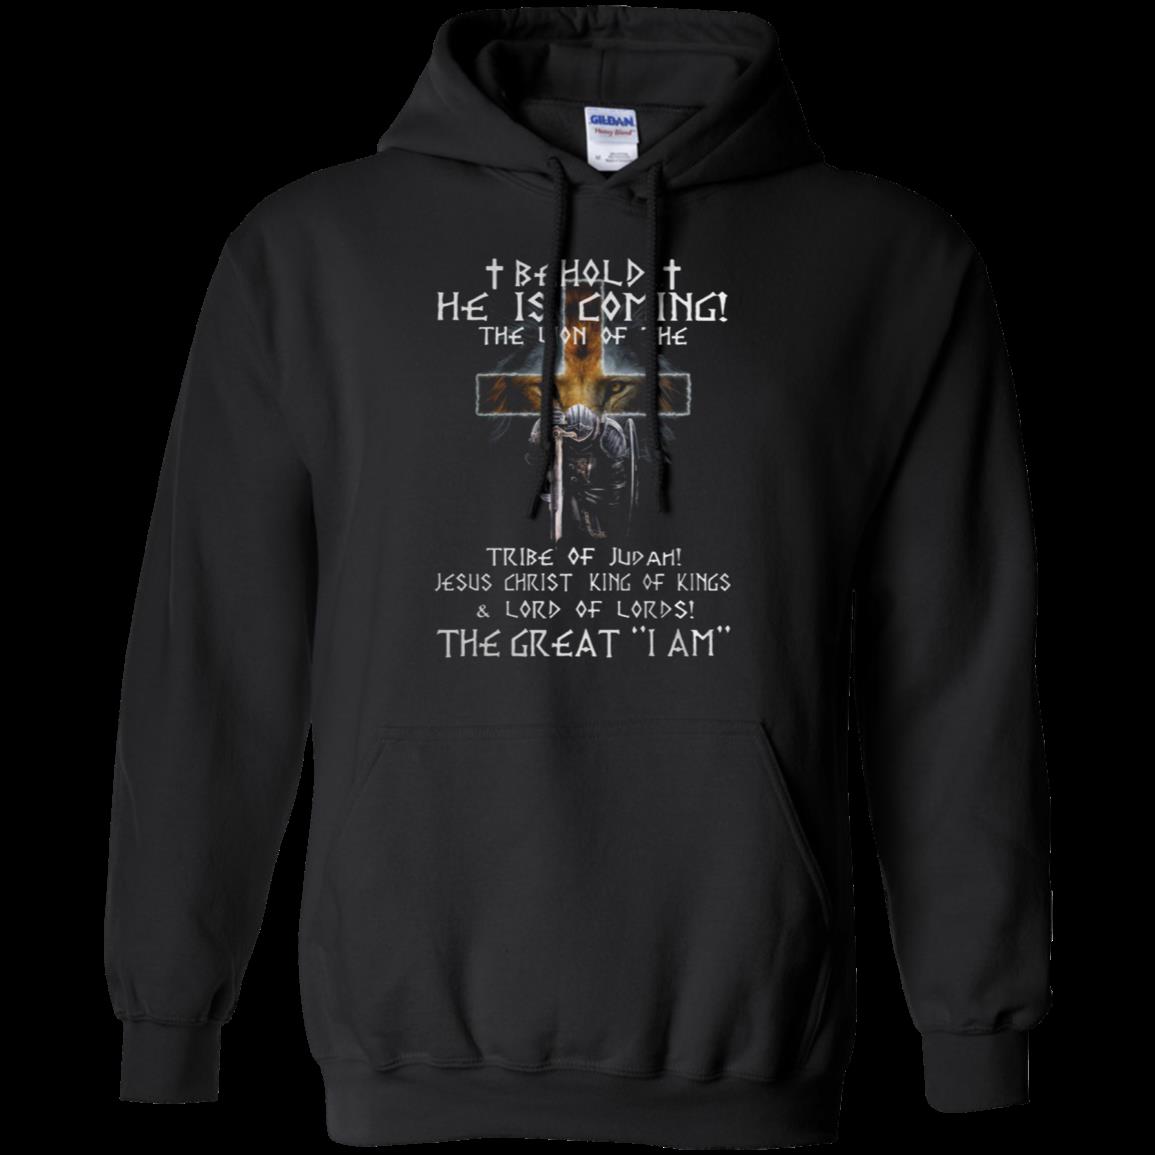 Behold He Is Coming The Lion Of The Tribe Of Judah Jesus Christ King Of Kings Shirt Hoodie